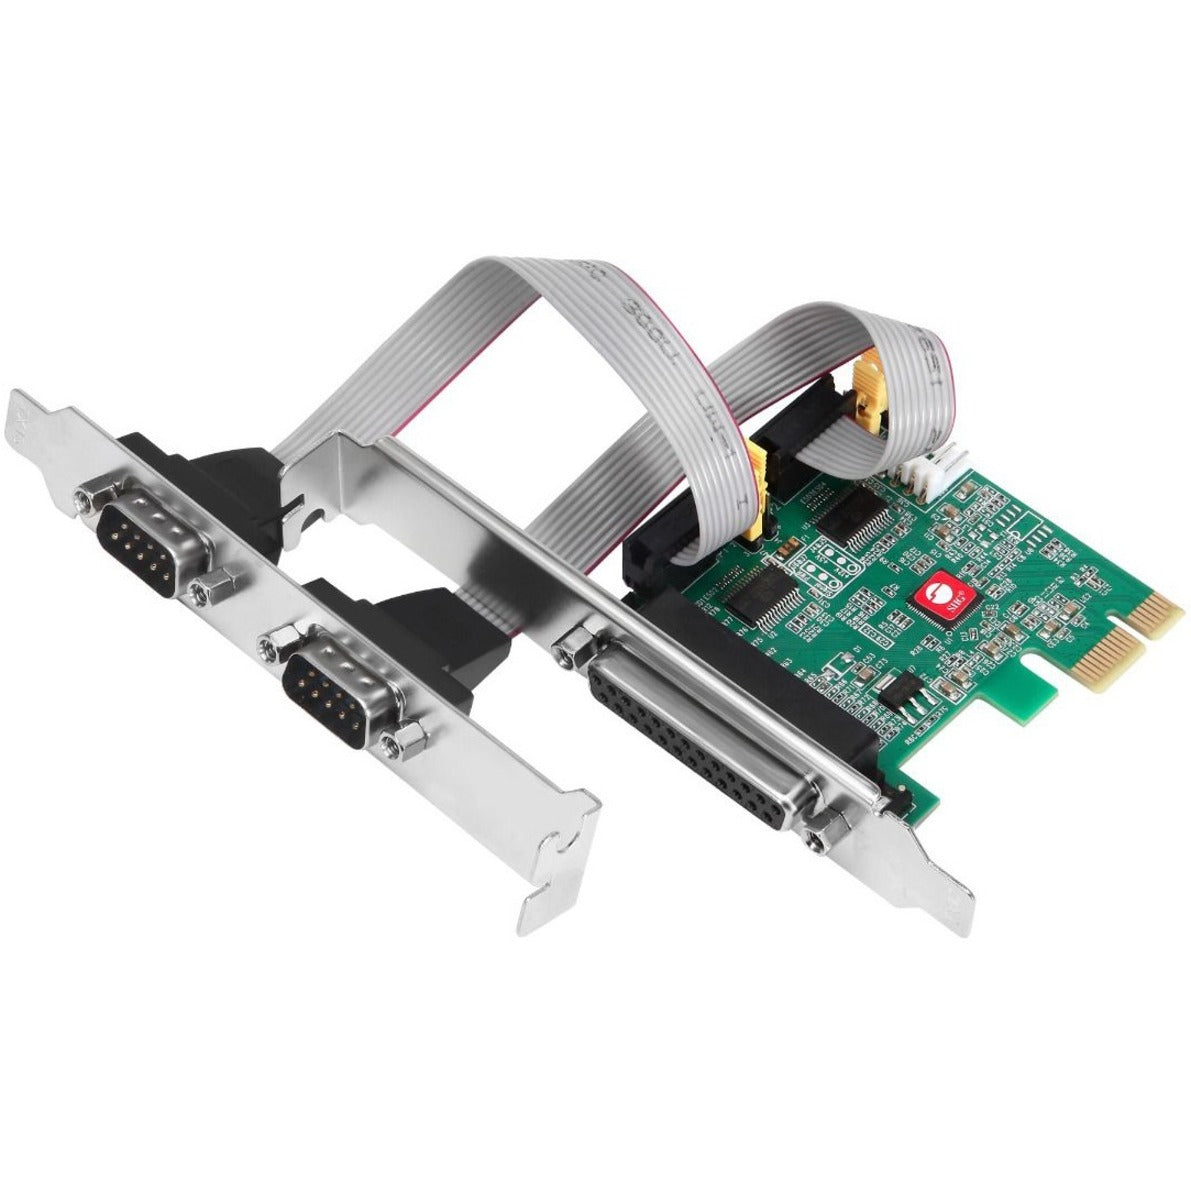 SIIG JJ-E20411-S1 DP Cyber 2S1P PCIe Card, Serial/Parallel Combo Adapter